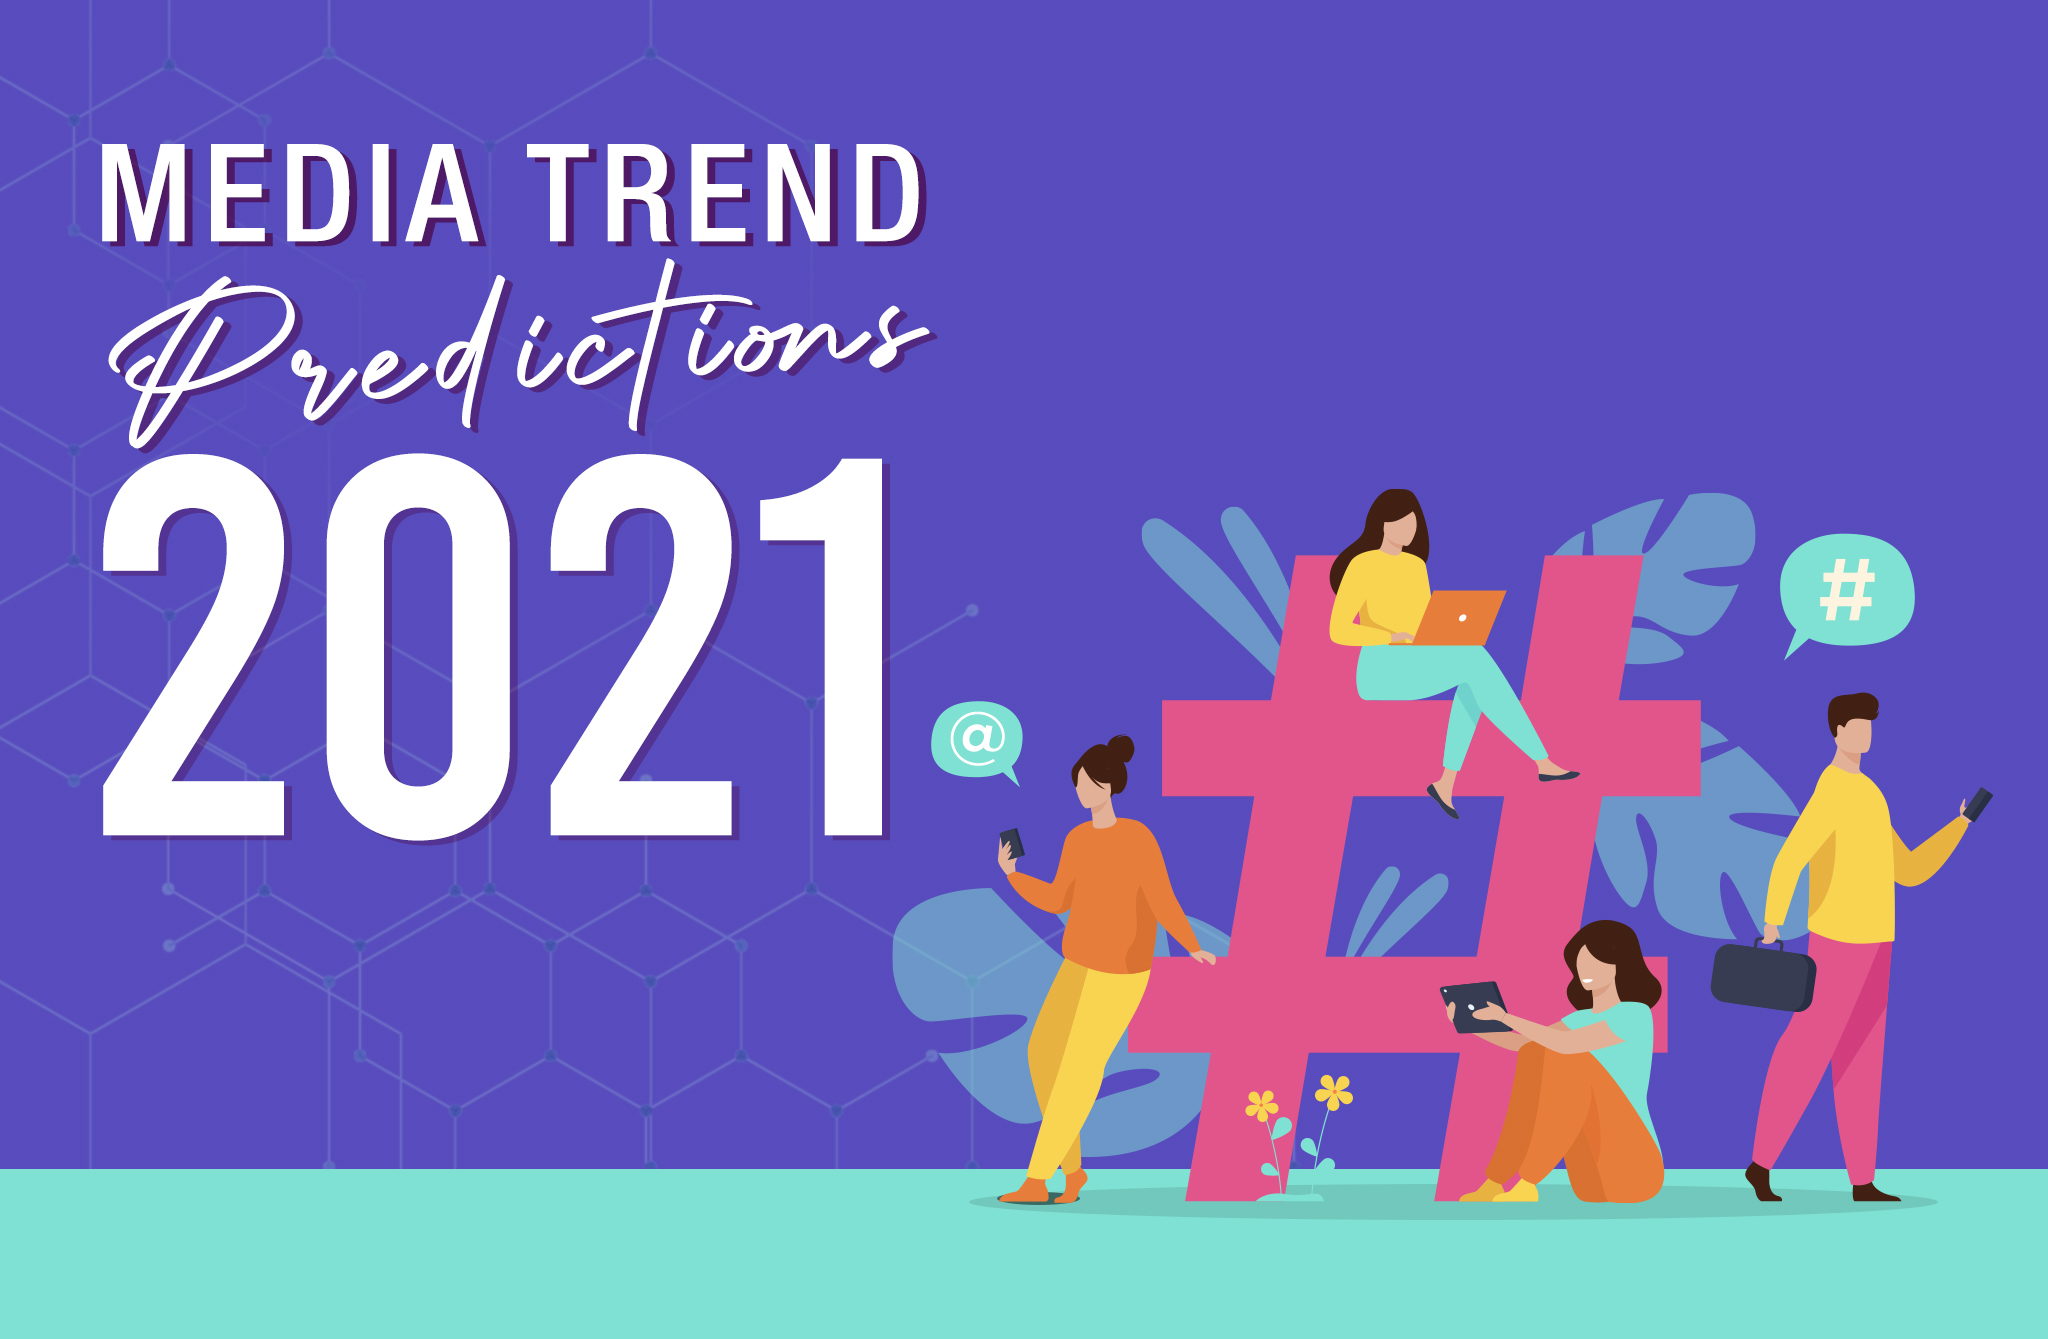 Blog- The active media trends for 2021